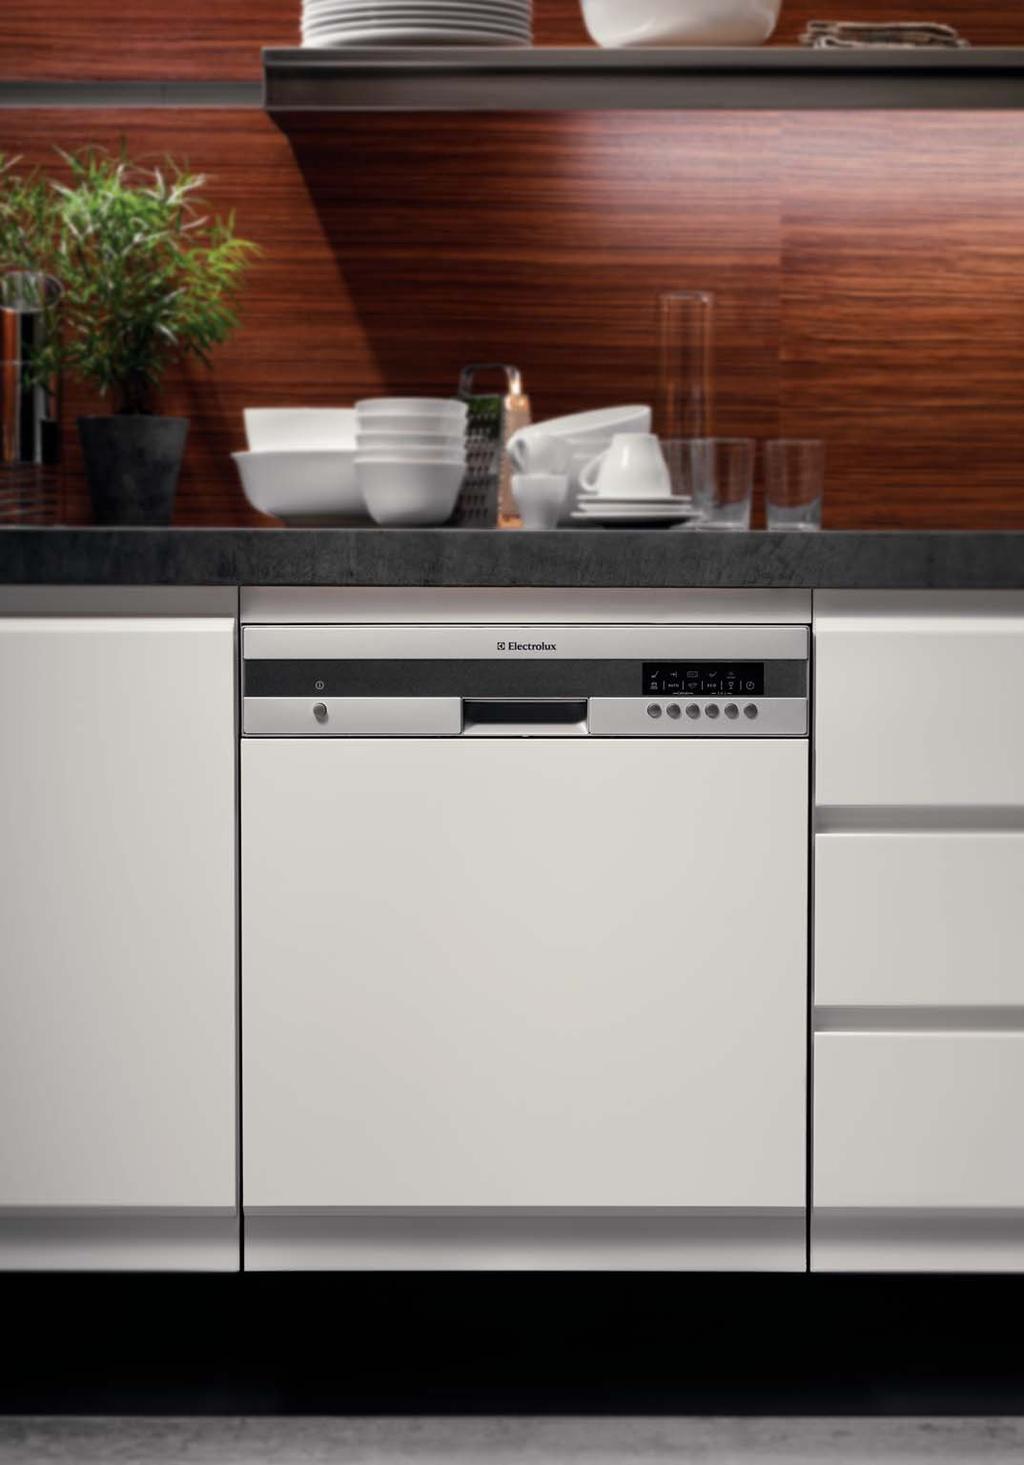 78 electrolux dishwashing electrolux dishwashing 79 Designs on the dishes Good looking models that think for themselves, our latest dishwashers will wash everything from pots and pans to fine